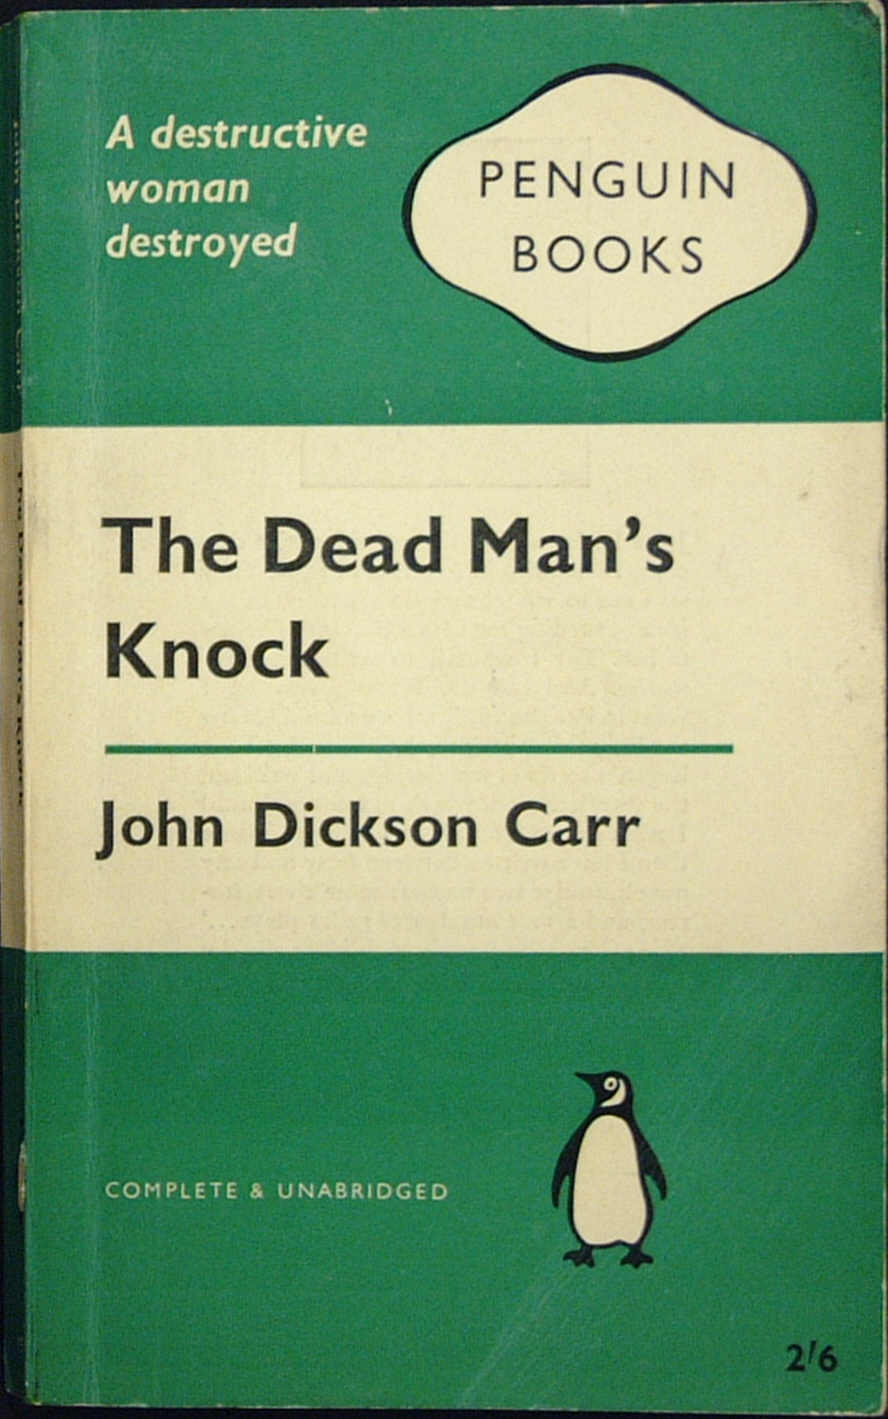 Penguin First Editions :: Early First Edition Penguin Books ...